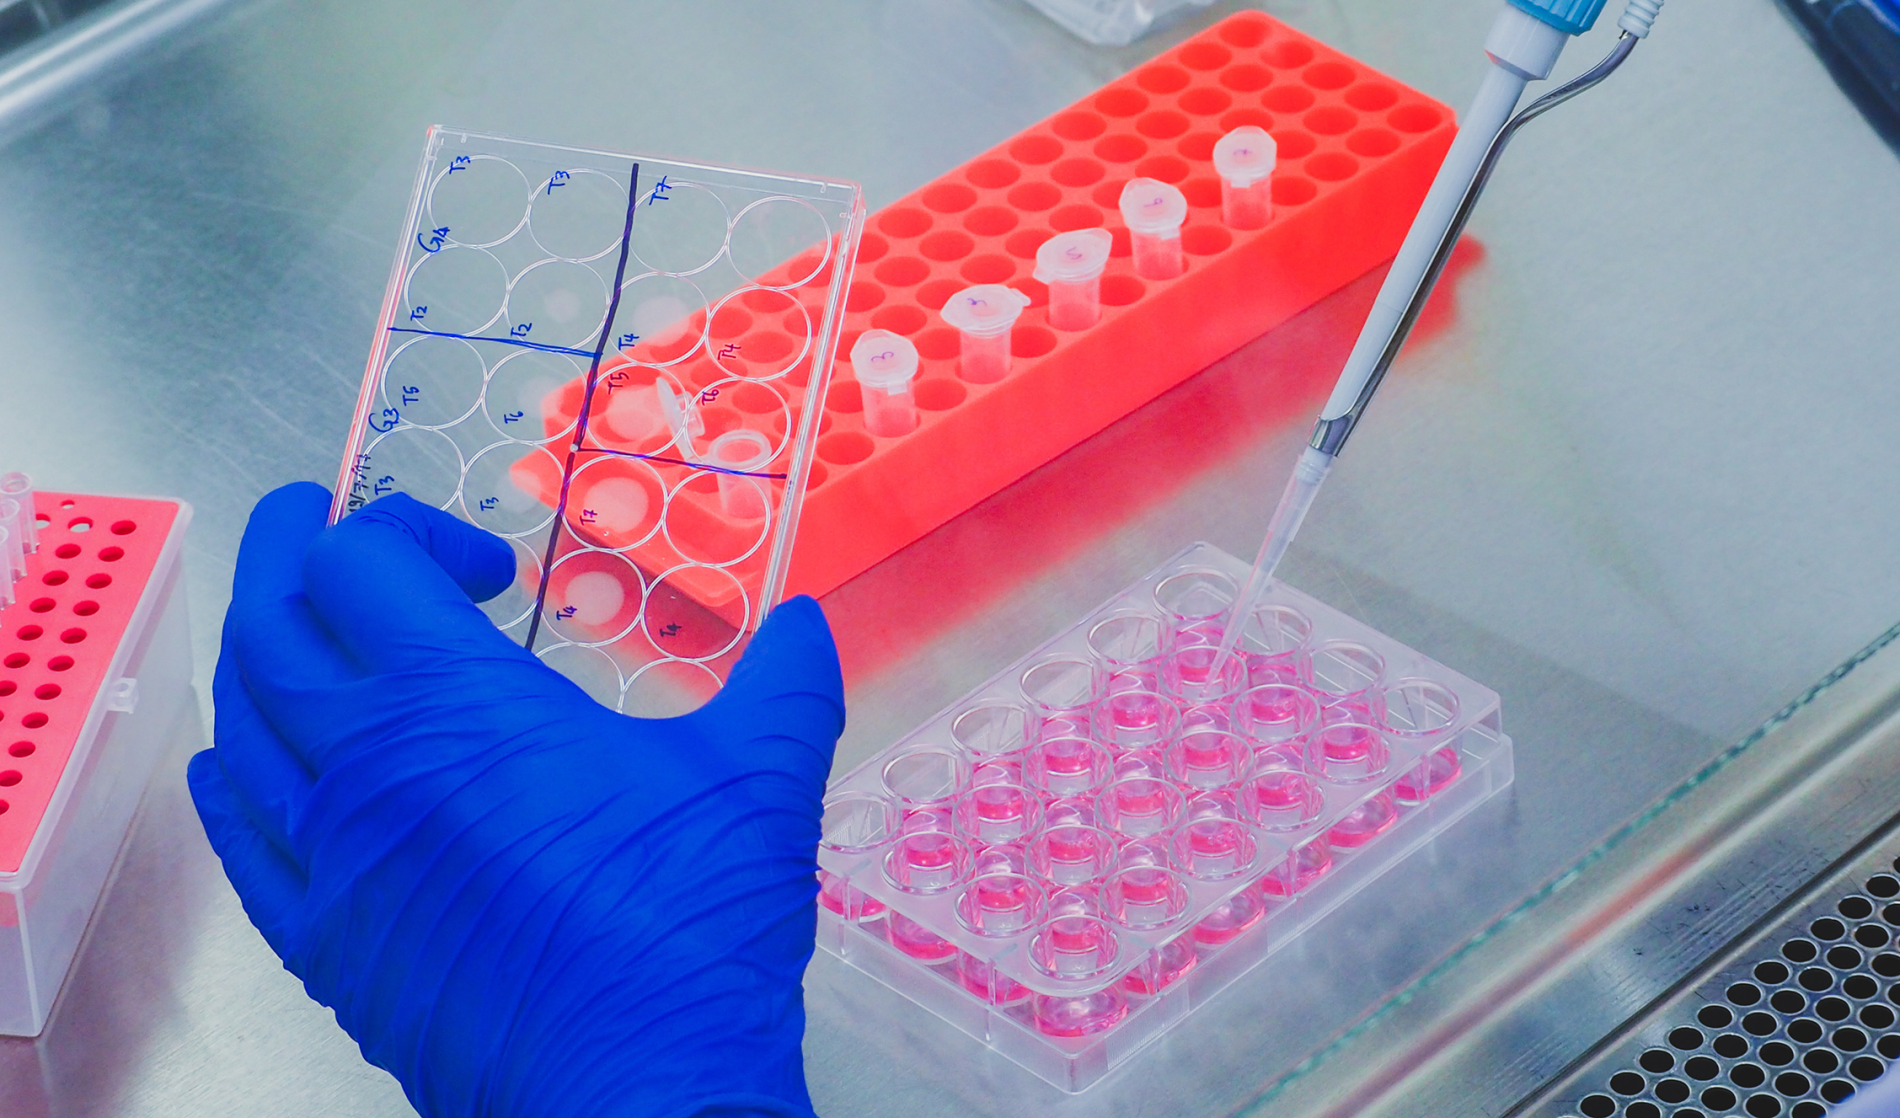 A shot inside a laminar flow hood shows a gloved hand holding the cover of a multi-well cell culture plate, while the opposite hand uses a micropipette in one of the plate's wells. A test-tube rack holding microtubes sits behind the culture plate.